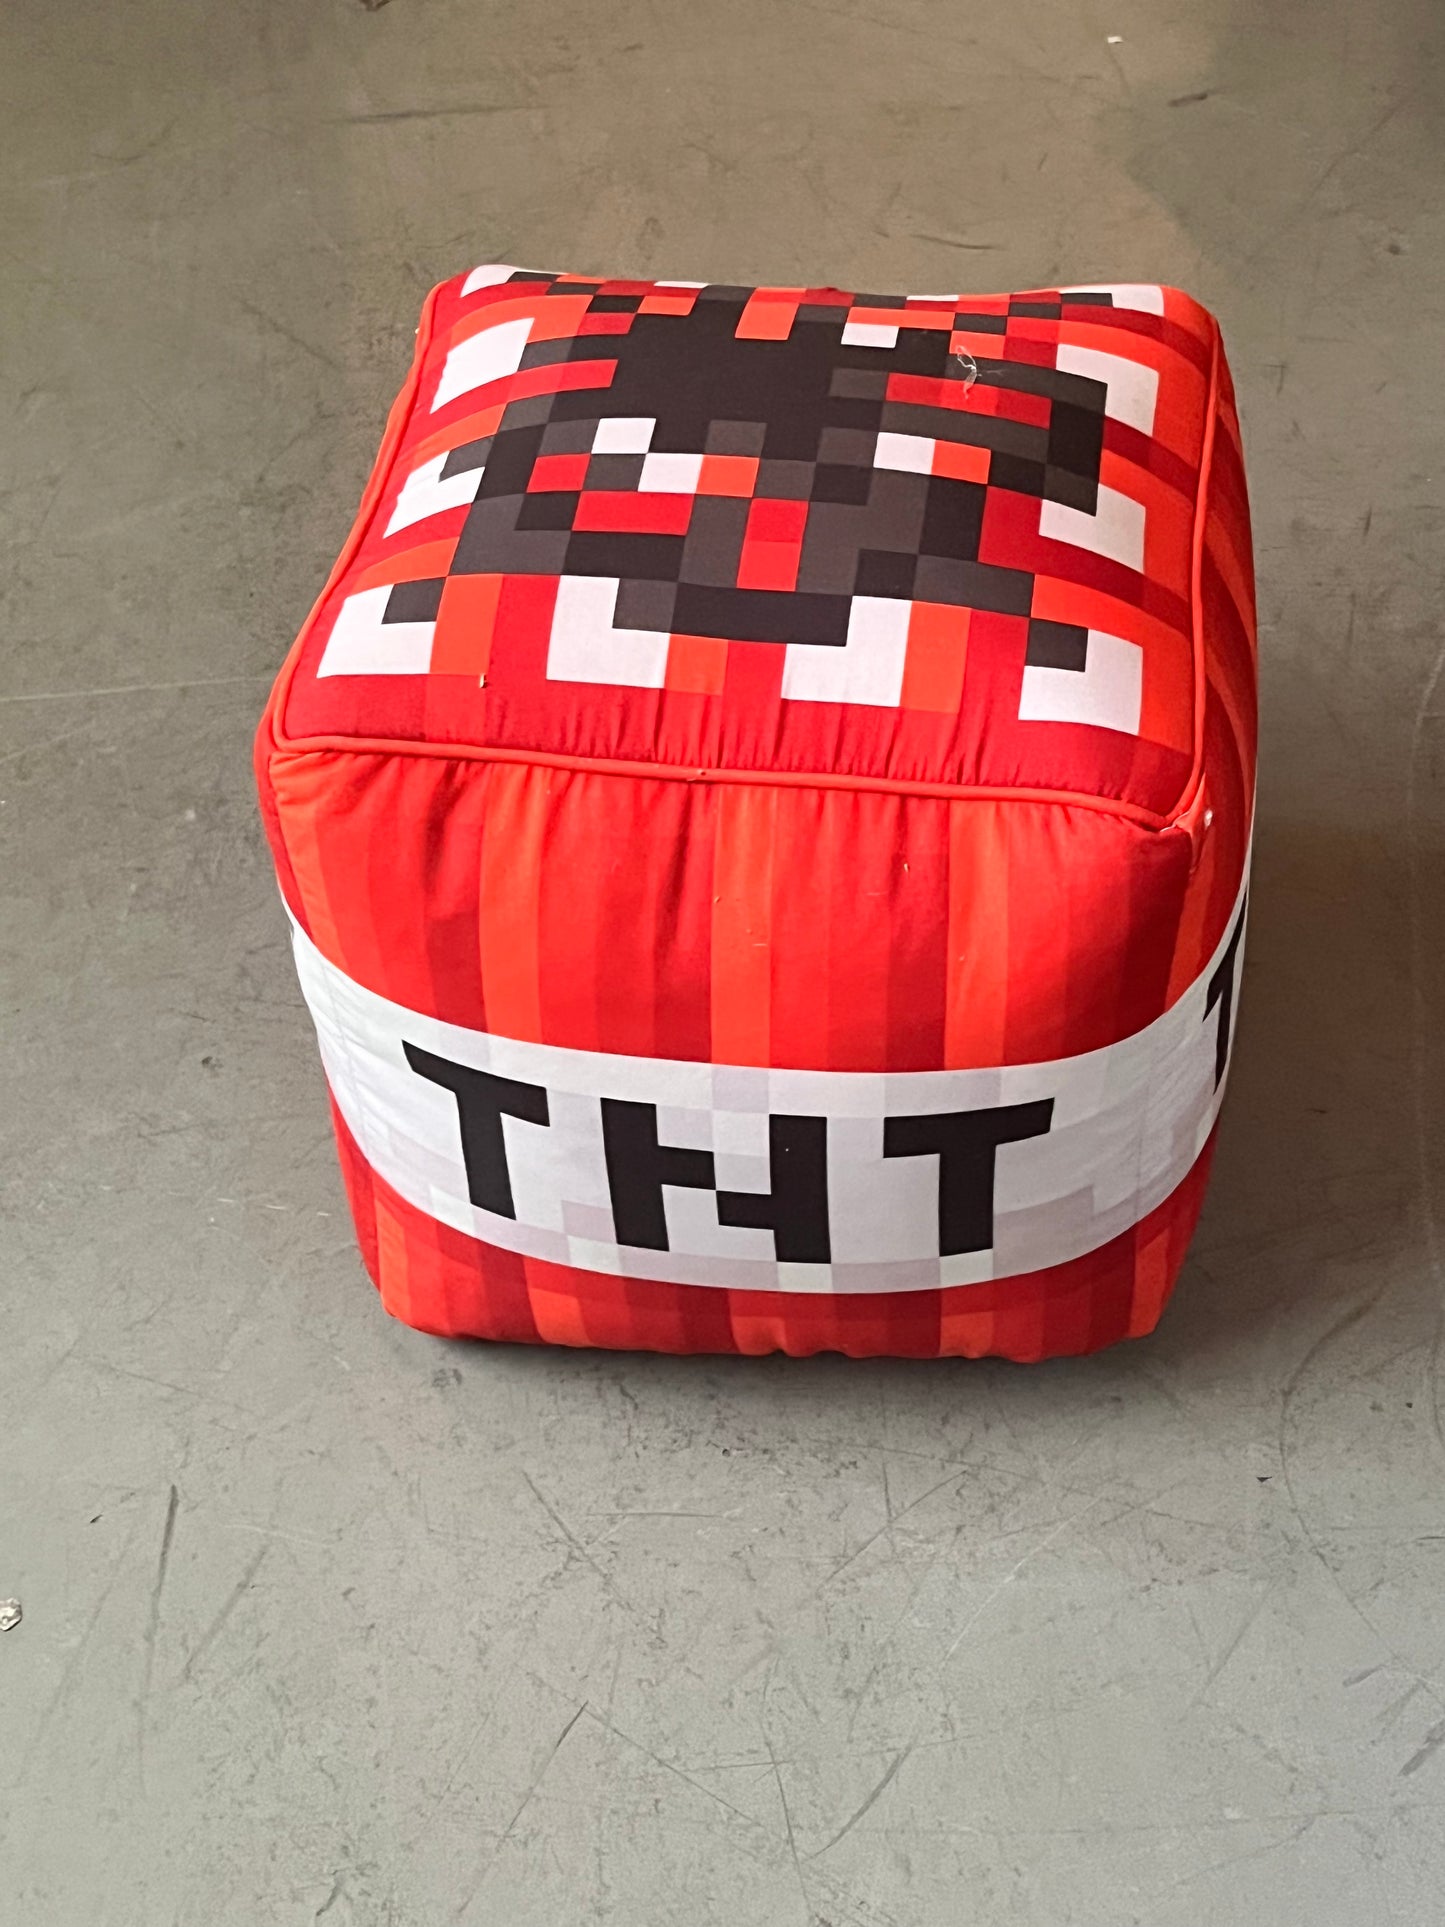 SILICON VALLEY: Jian Yang’s Hacker Hostel Couch Pillows & Plush